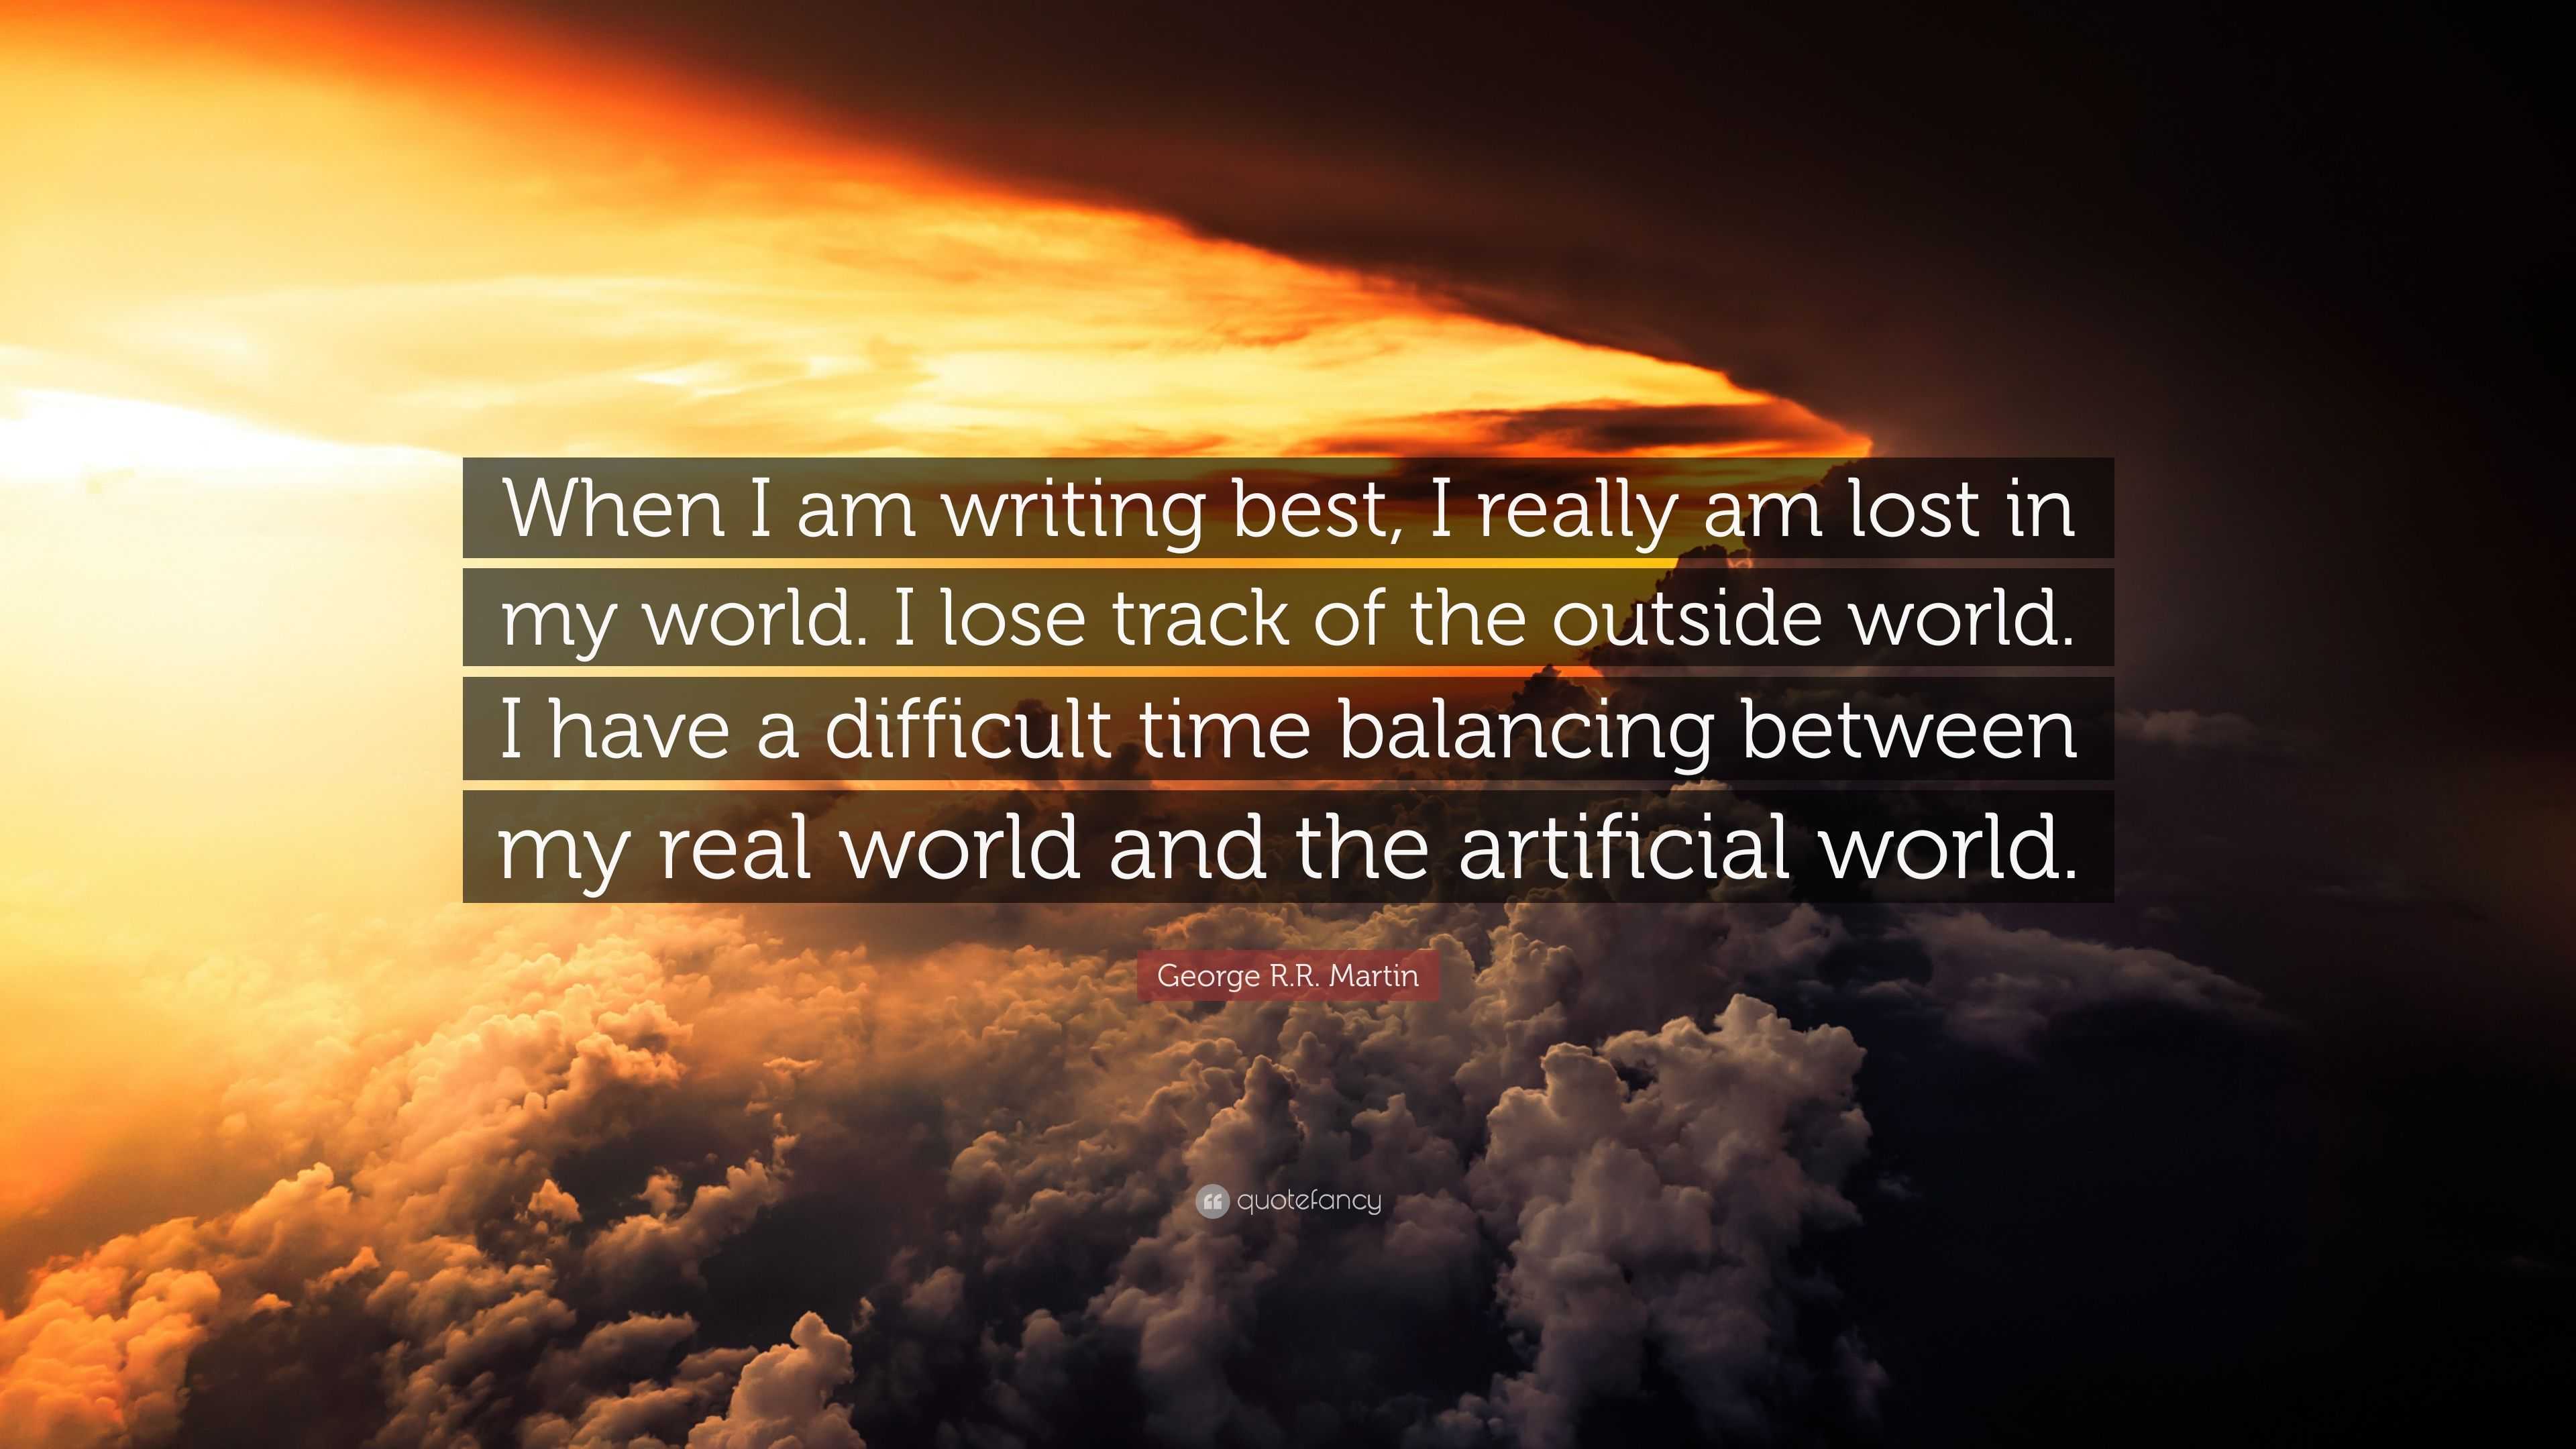 George R.R. Martin Quote: “When I am writing best